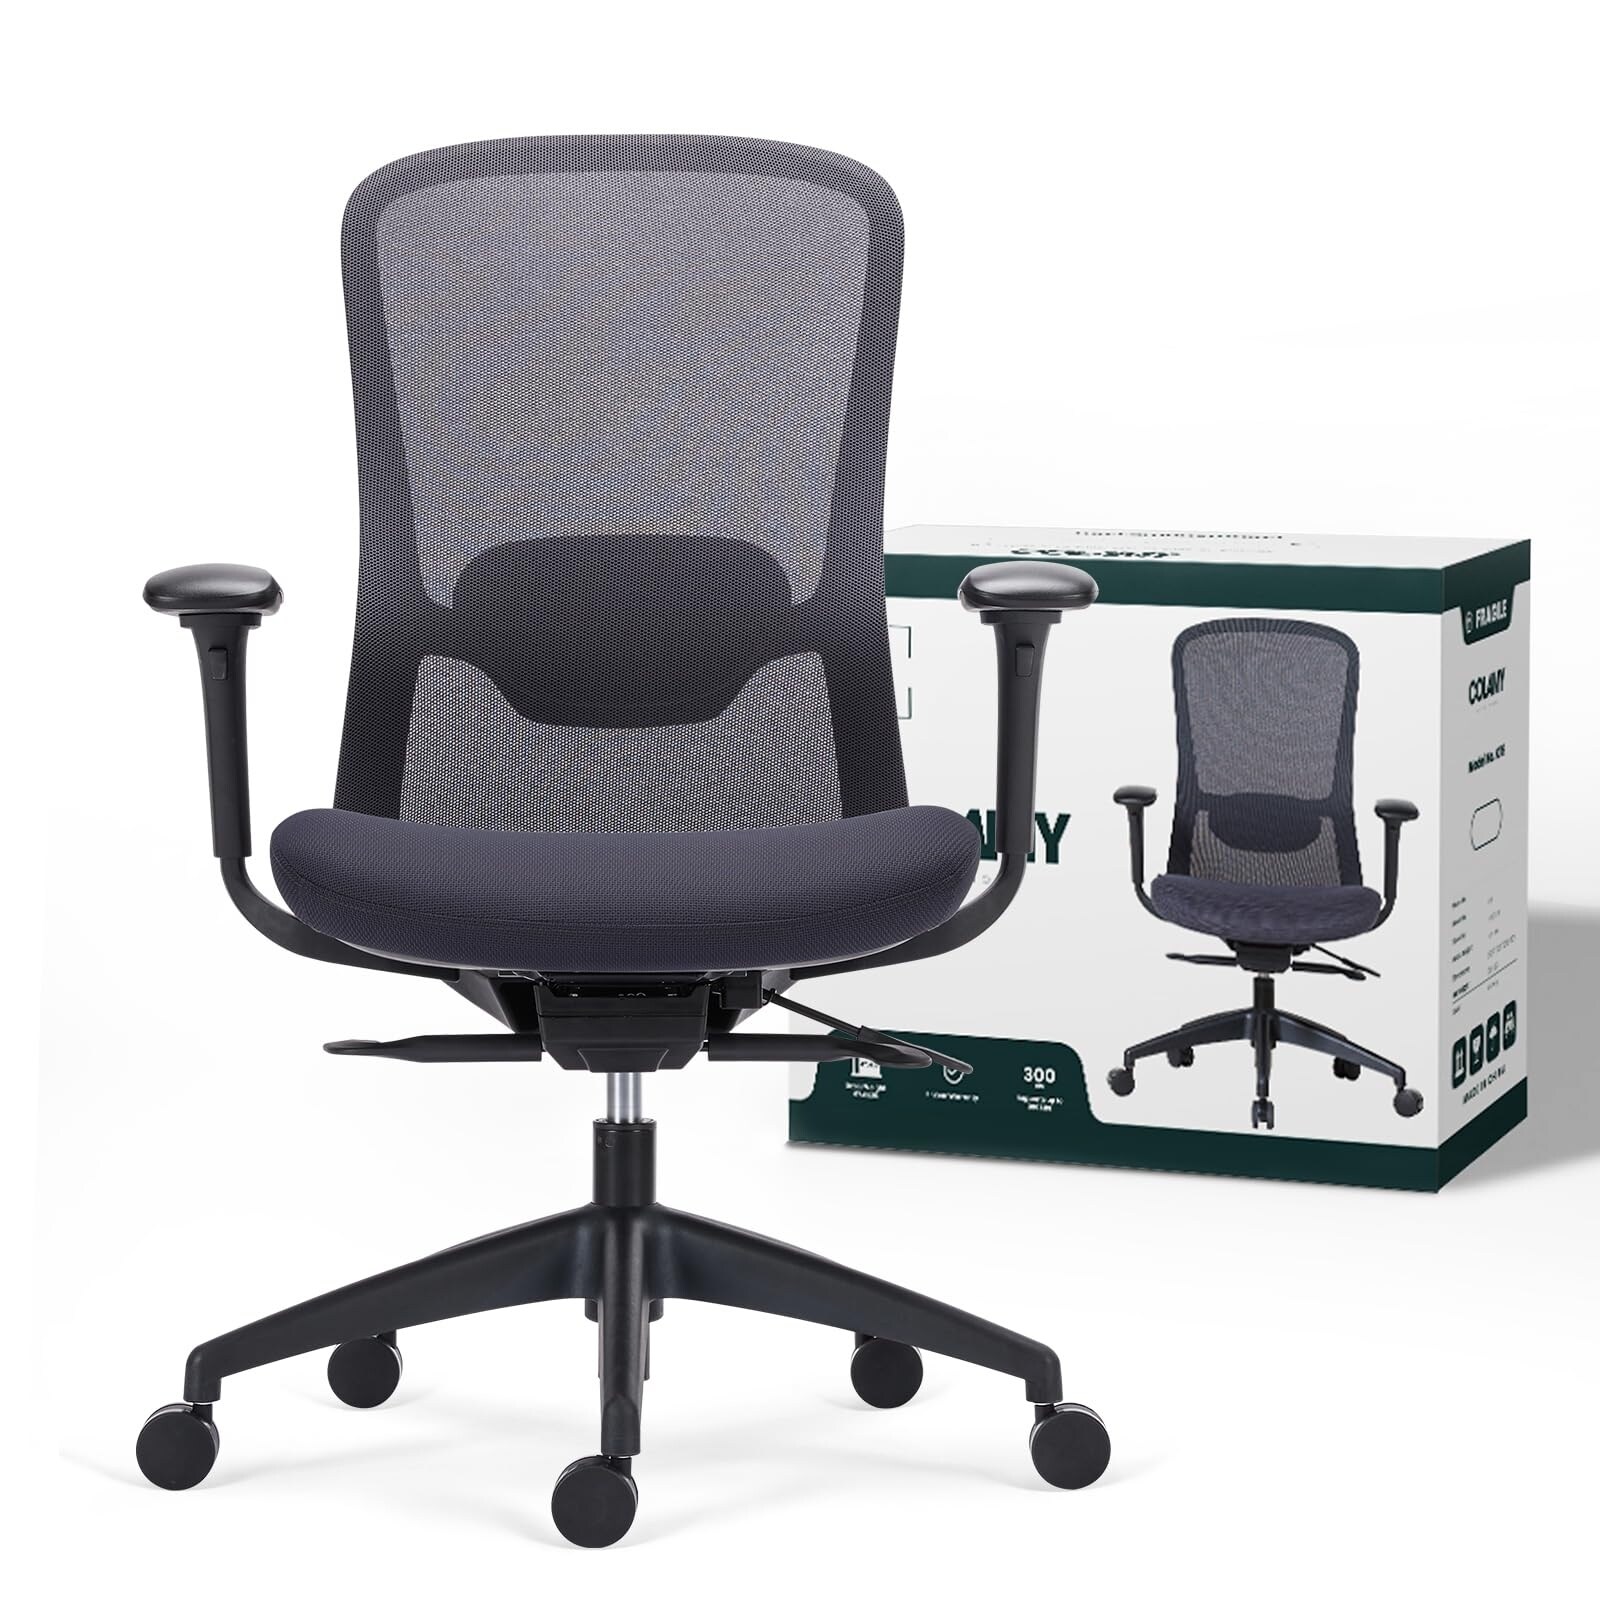 https://ak1.ostkcdn.com/images/products/is/images/direct/ff2d2708c11b1d03f6a255114c2ab8ed8ff18000/Ergonomic-Mesh-Office-Chair%2C-Mid-Back-Computer-Executive-Desk-Chair-with-4D-Armrests%2C-Slide-Seat%2C-Tilt-Lock-and-Lumbar-Support.jpg